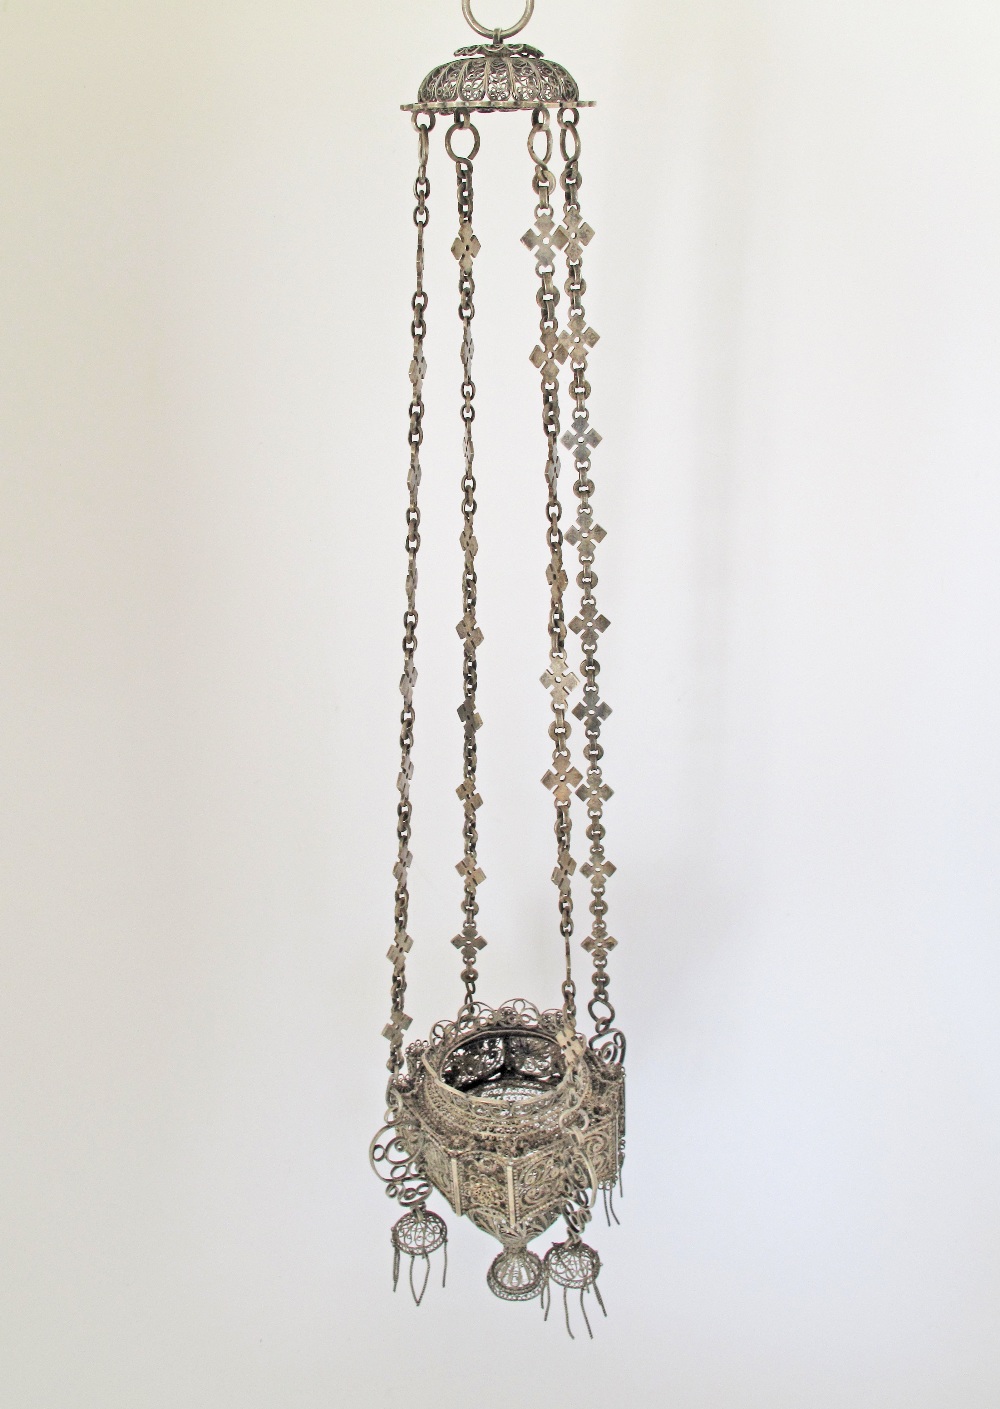 An Orthodox silver votive hanging lamp with filigree decoration. C18th / 19th century. H60cm,